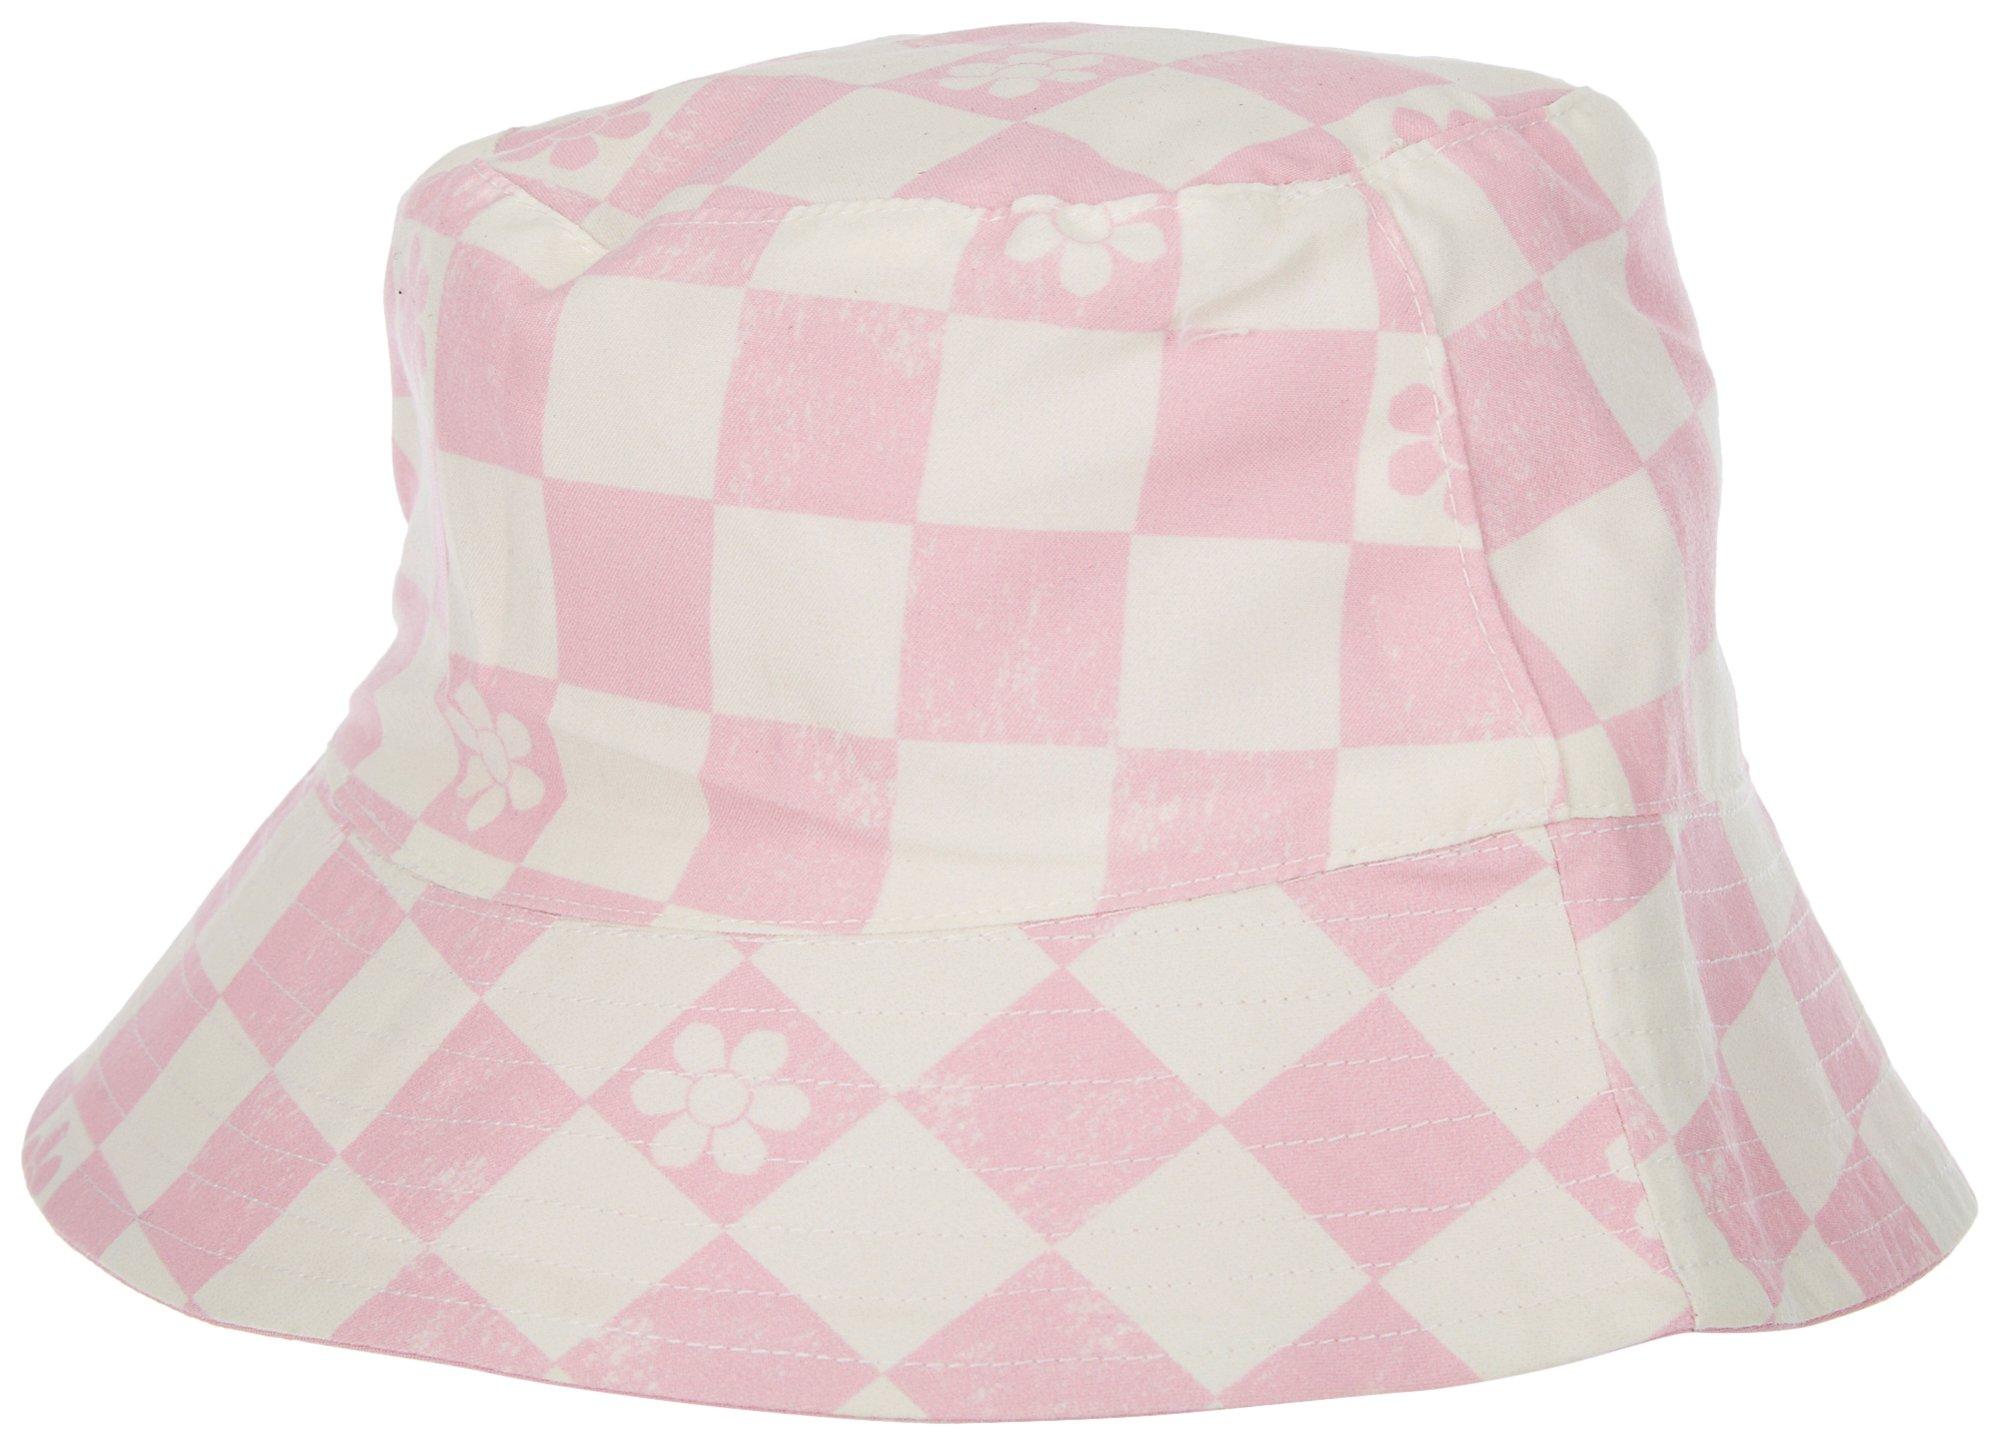 Baby Reversible Checkered & Solid Bucket Sun Hat